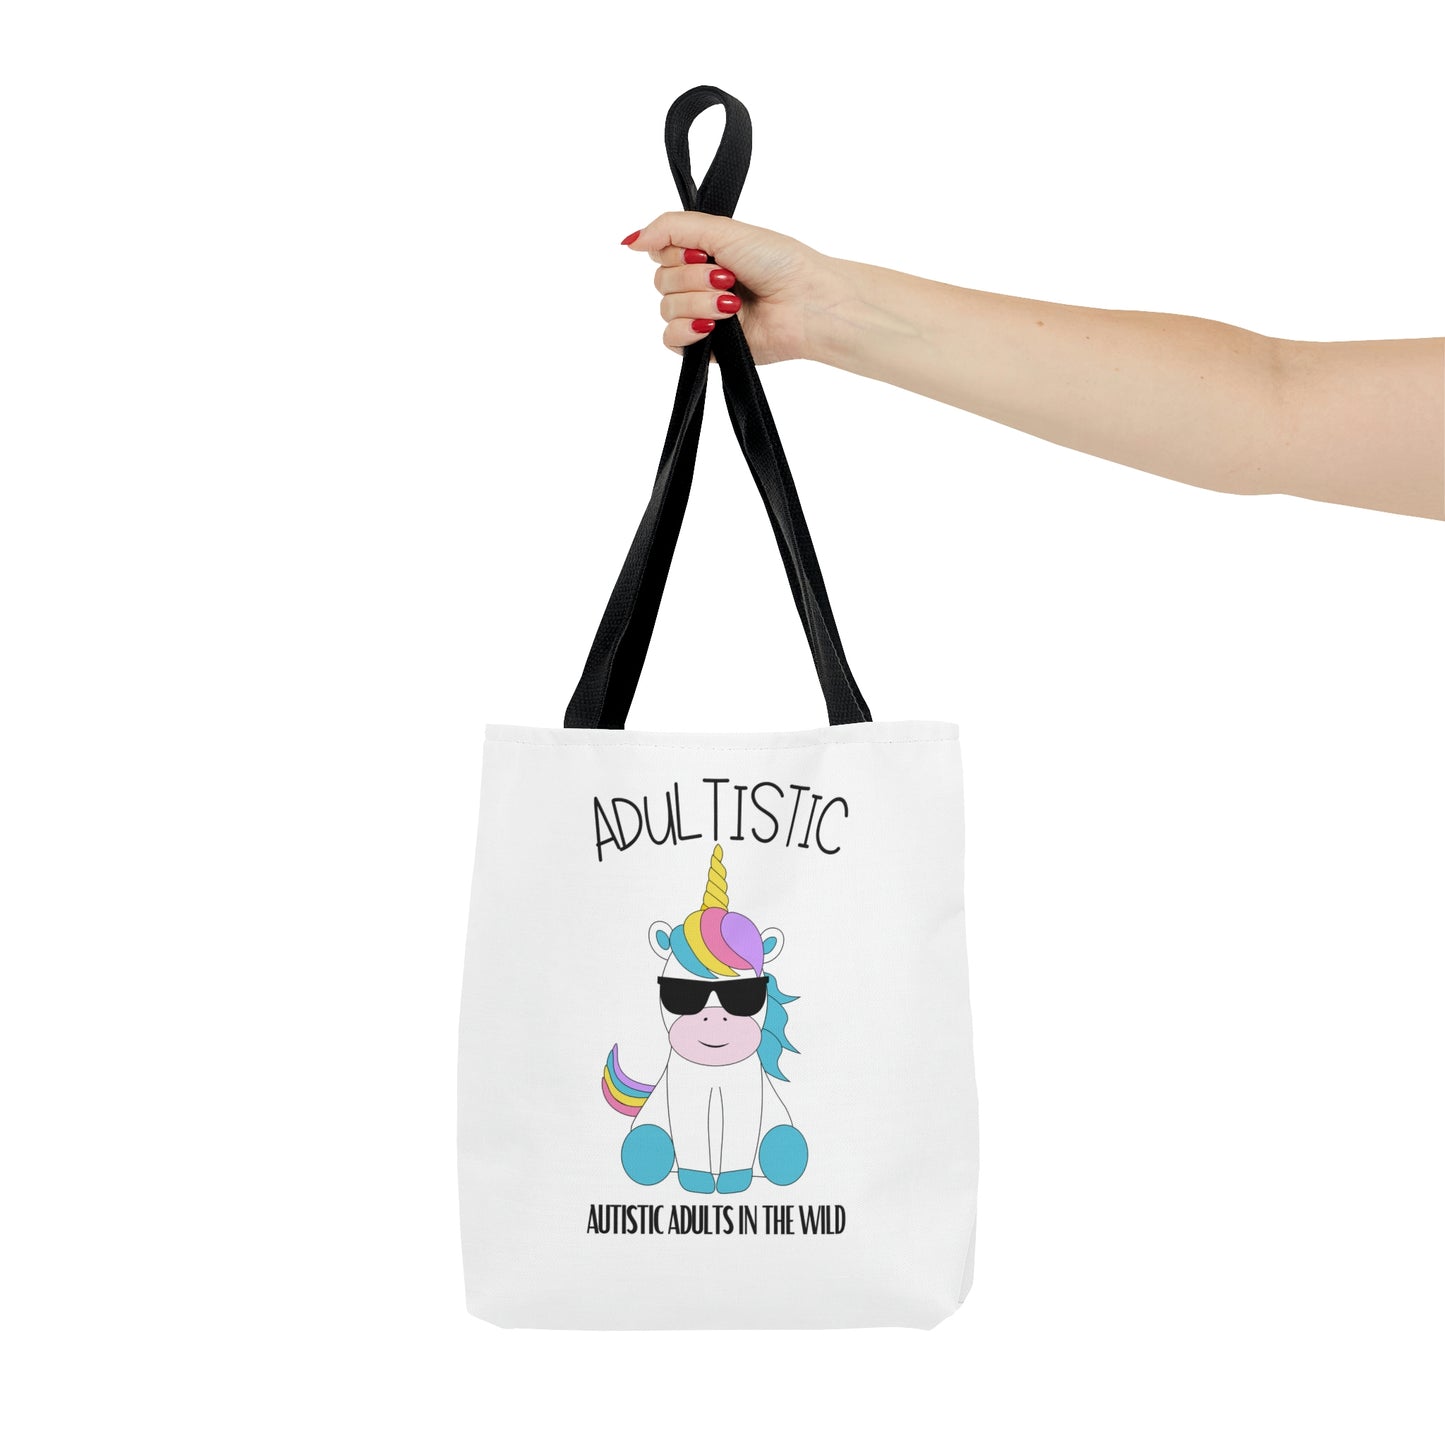 "Autistic Adults In The Wild" Shady Unicorn Tote Bag in 3 sizes